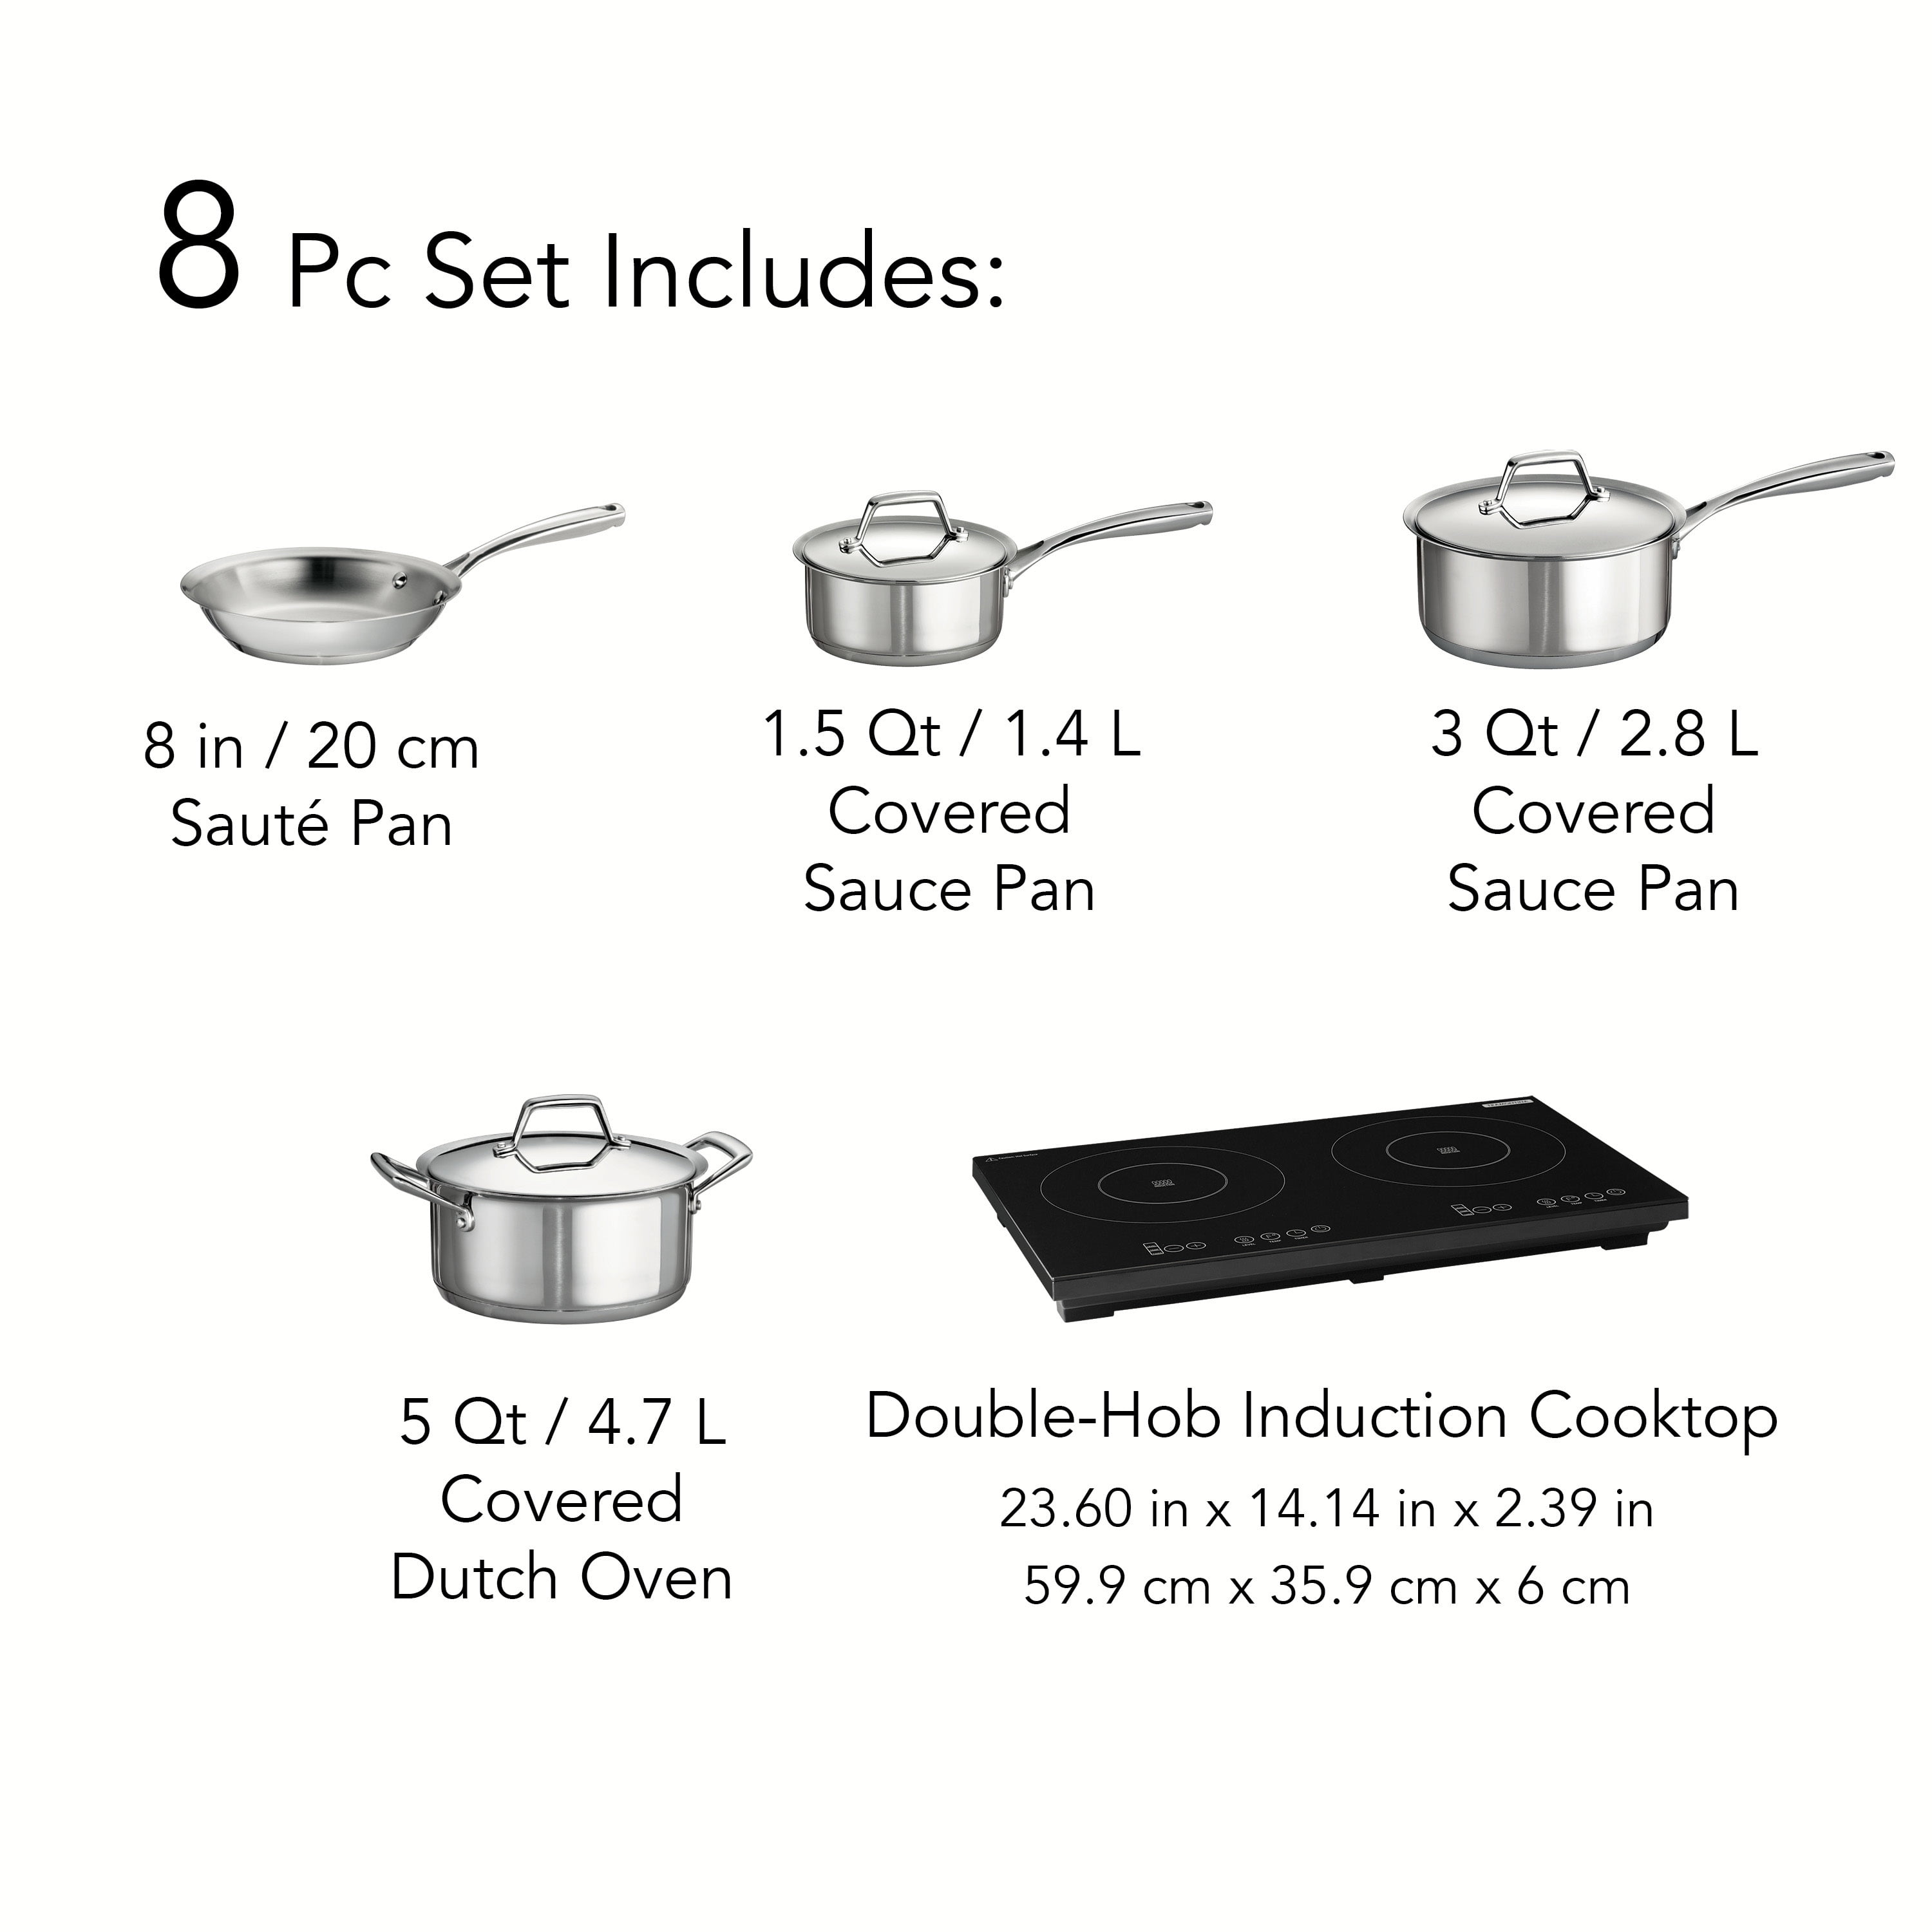 Bargains by Green - Tramontina 3-piece Induction Cooking System $60  Tramontina 3-piece Induction Cooking System New Retail:$100 2 items  available ($60 each) Features: Includes Portable Induction Cooktop & 4 Qt  Tri-Ply Clad-Covered